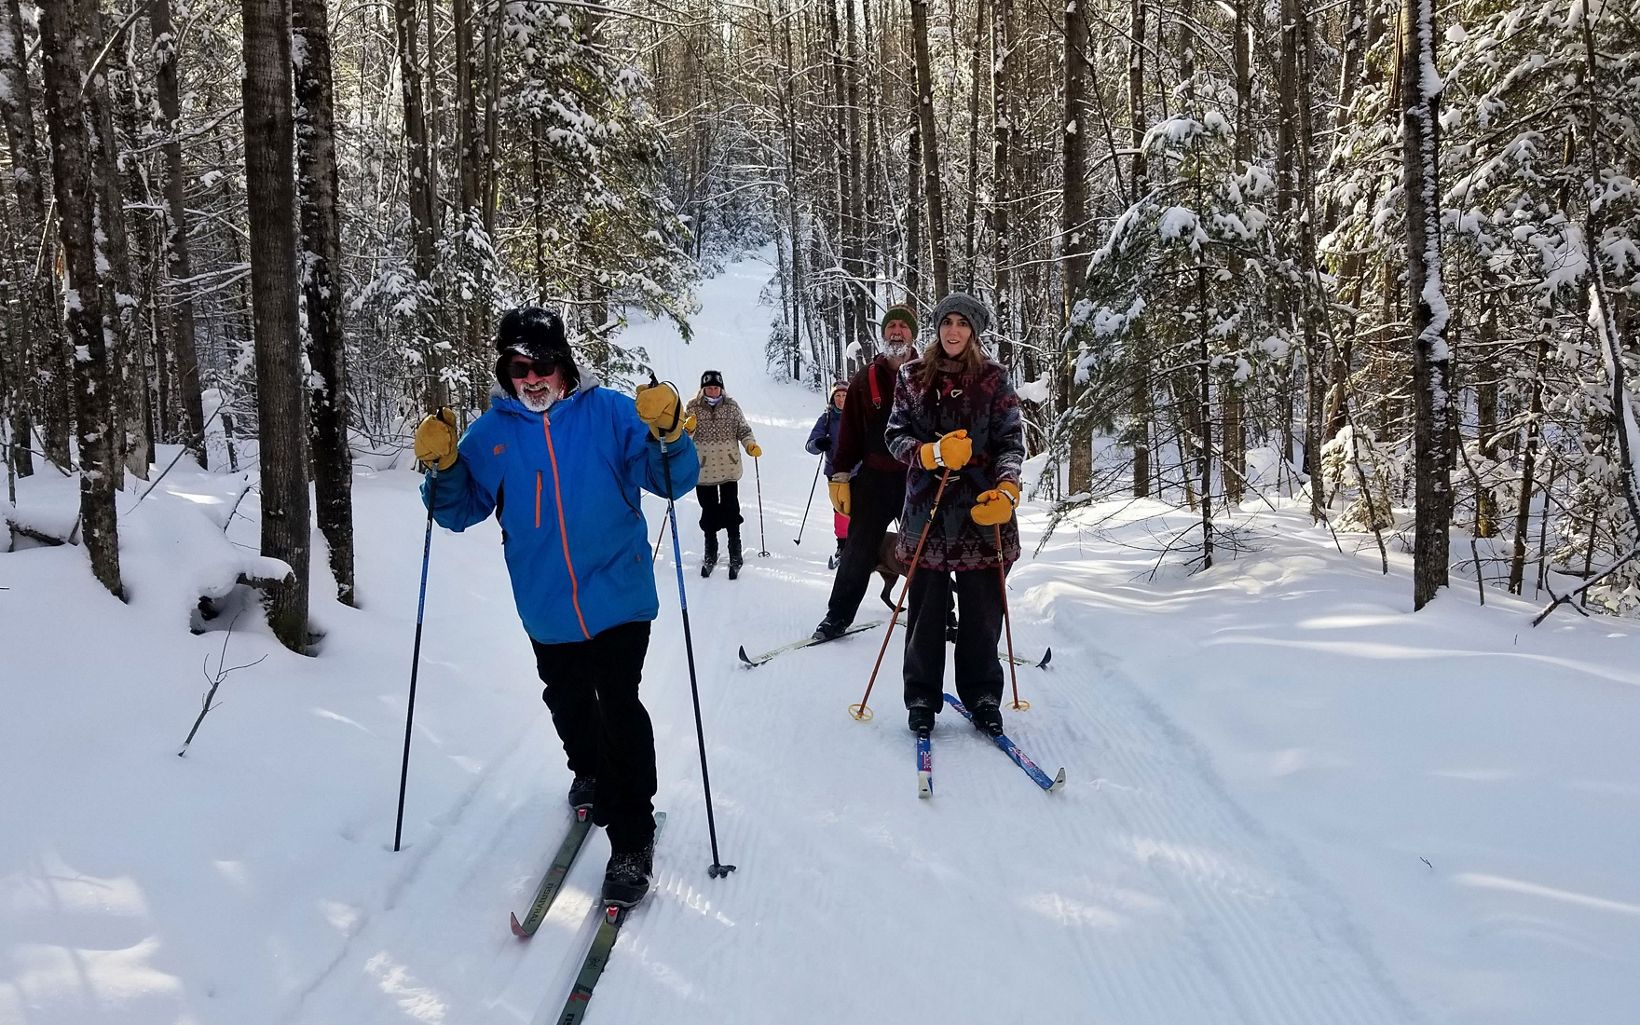 The Catherine Wolter Wilderness Area is a fun place for winter cross-country skiing.